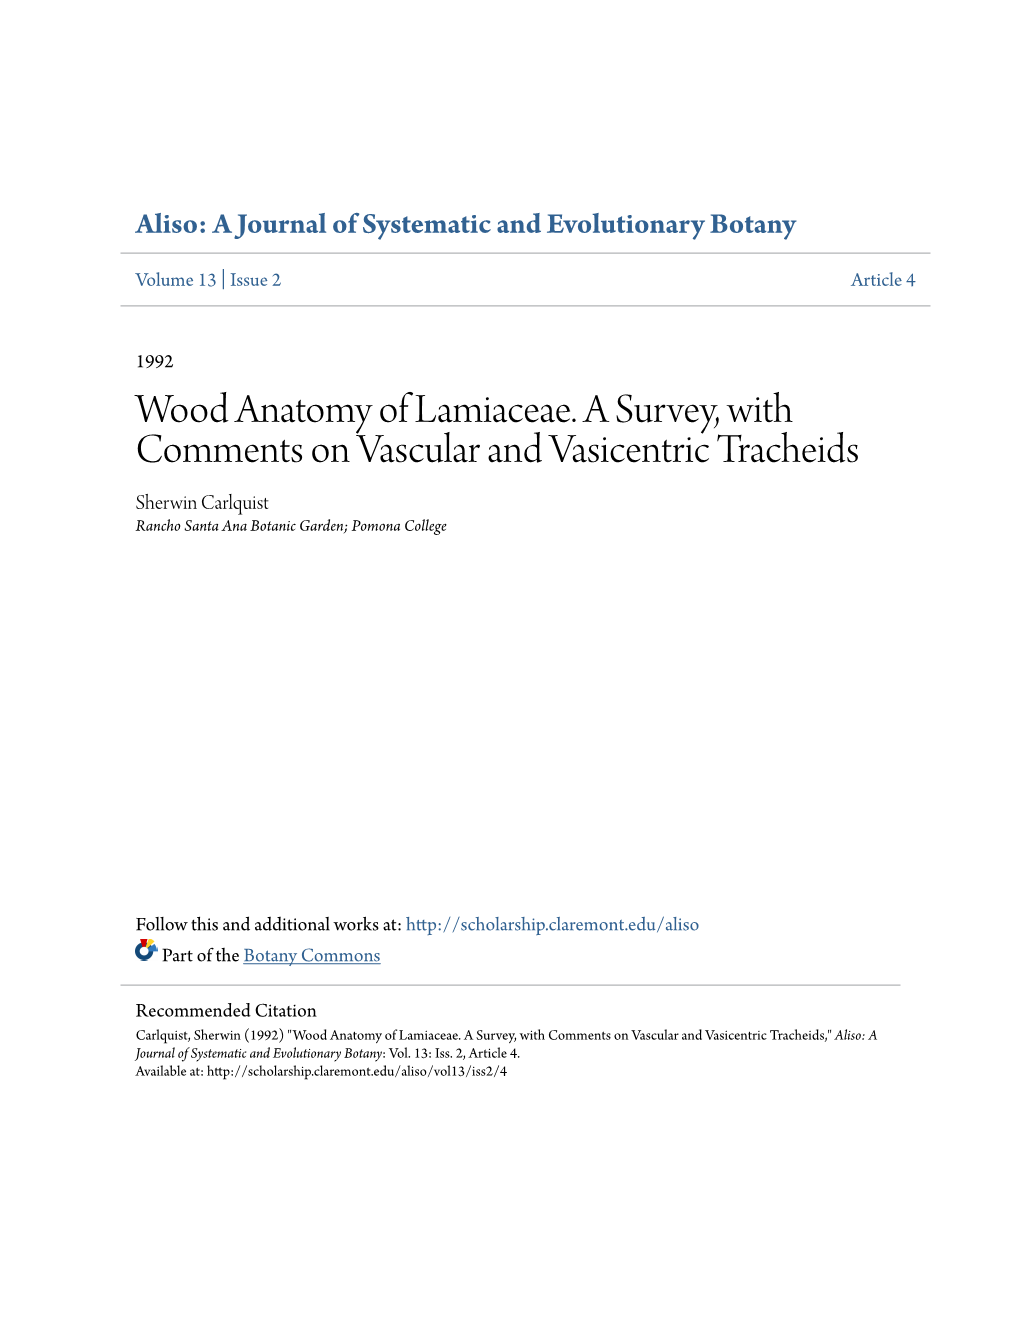 Wood Anatomy of Lamiaceae. a Survey, with Comments on Vascular and Vasicentric Tracheids Sherwin Carlquist Rancho Santa Ana Botanic Garden; Pomona College